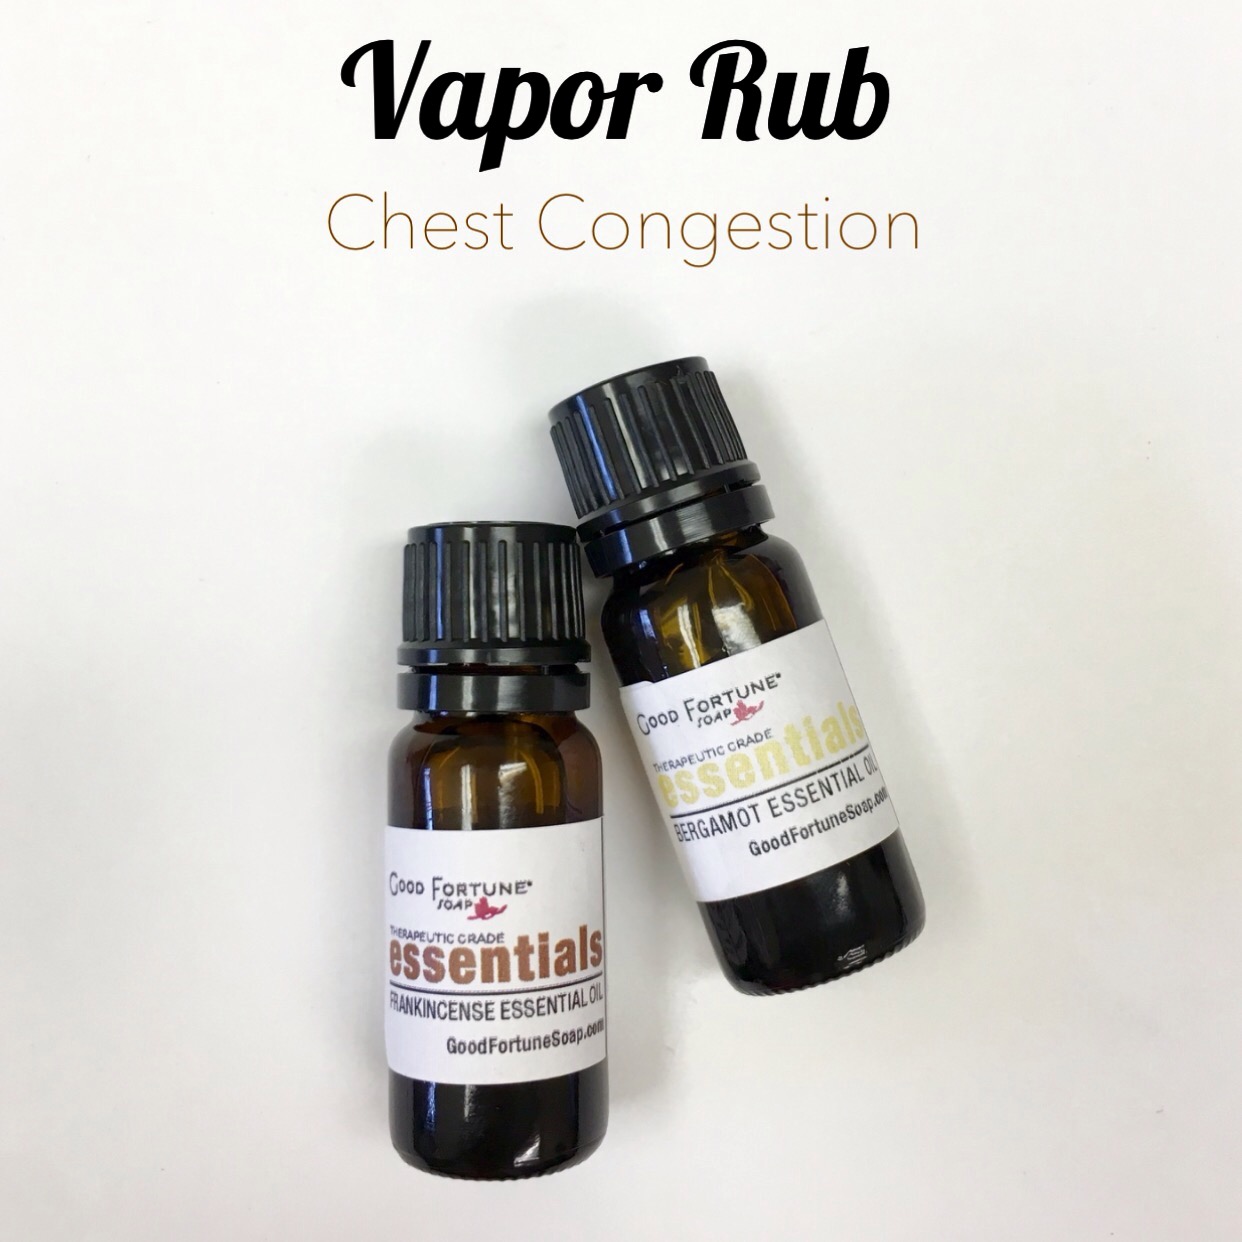 Essential Oils for congestion